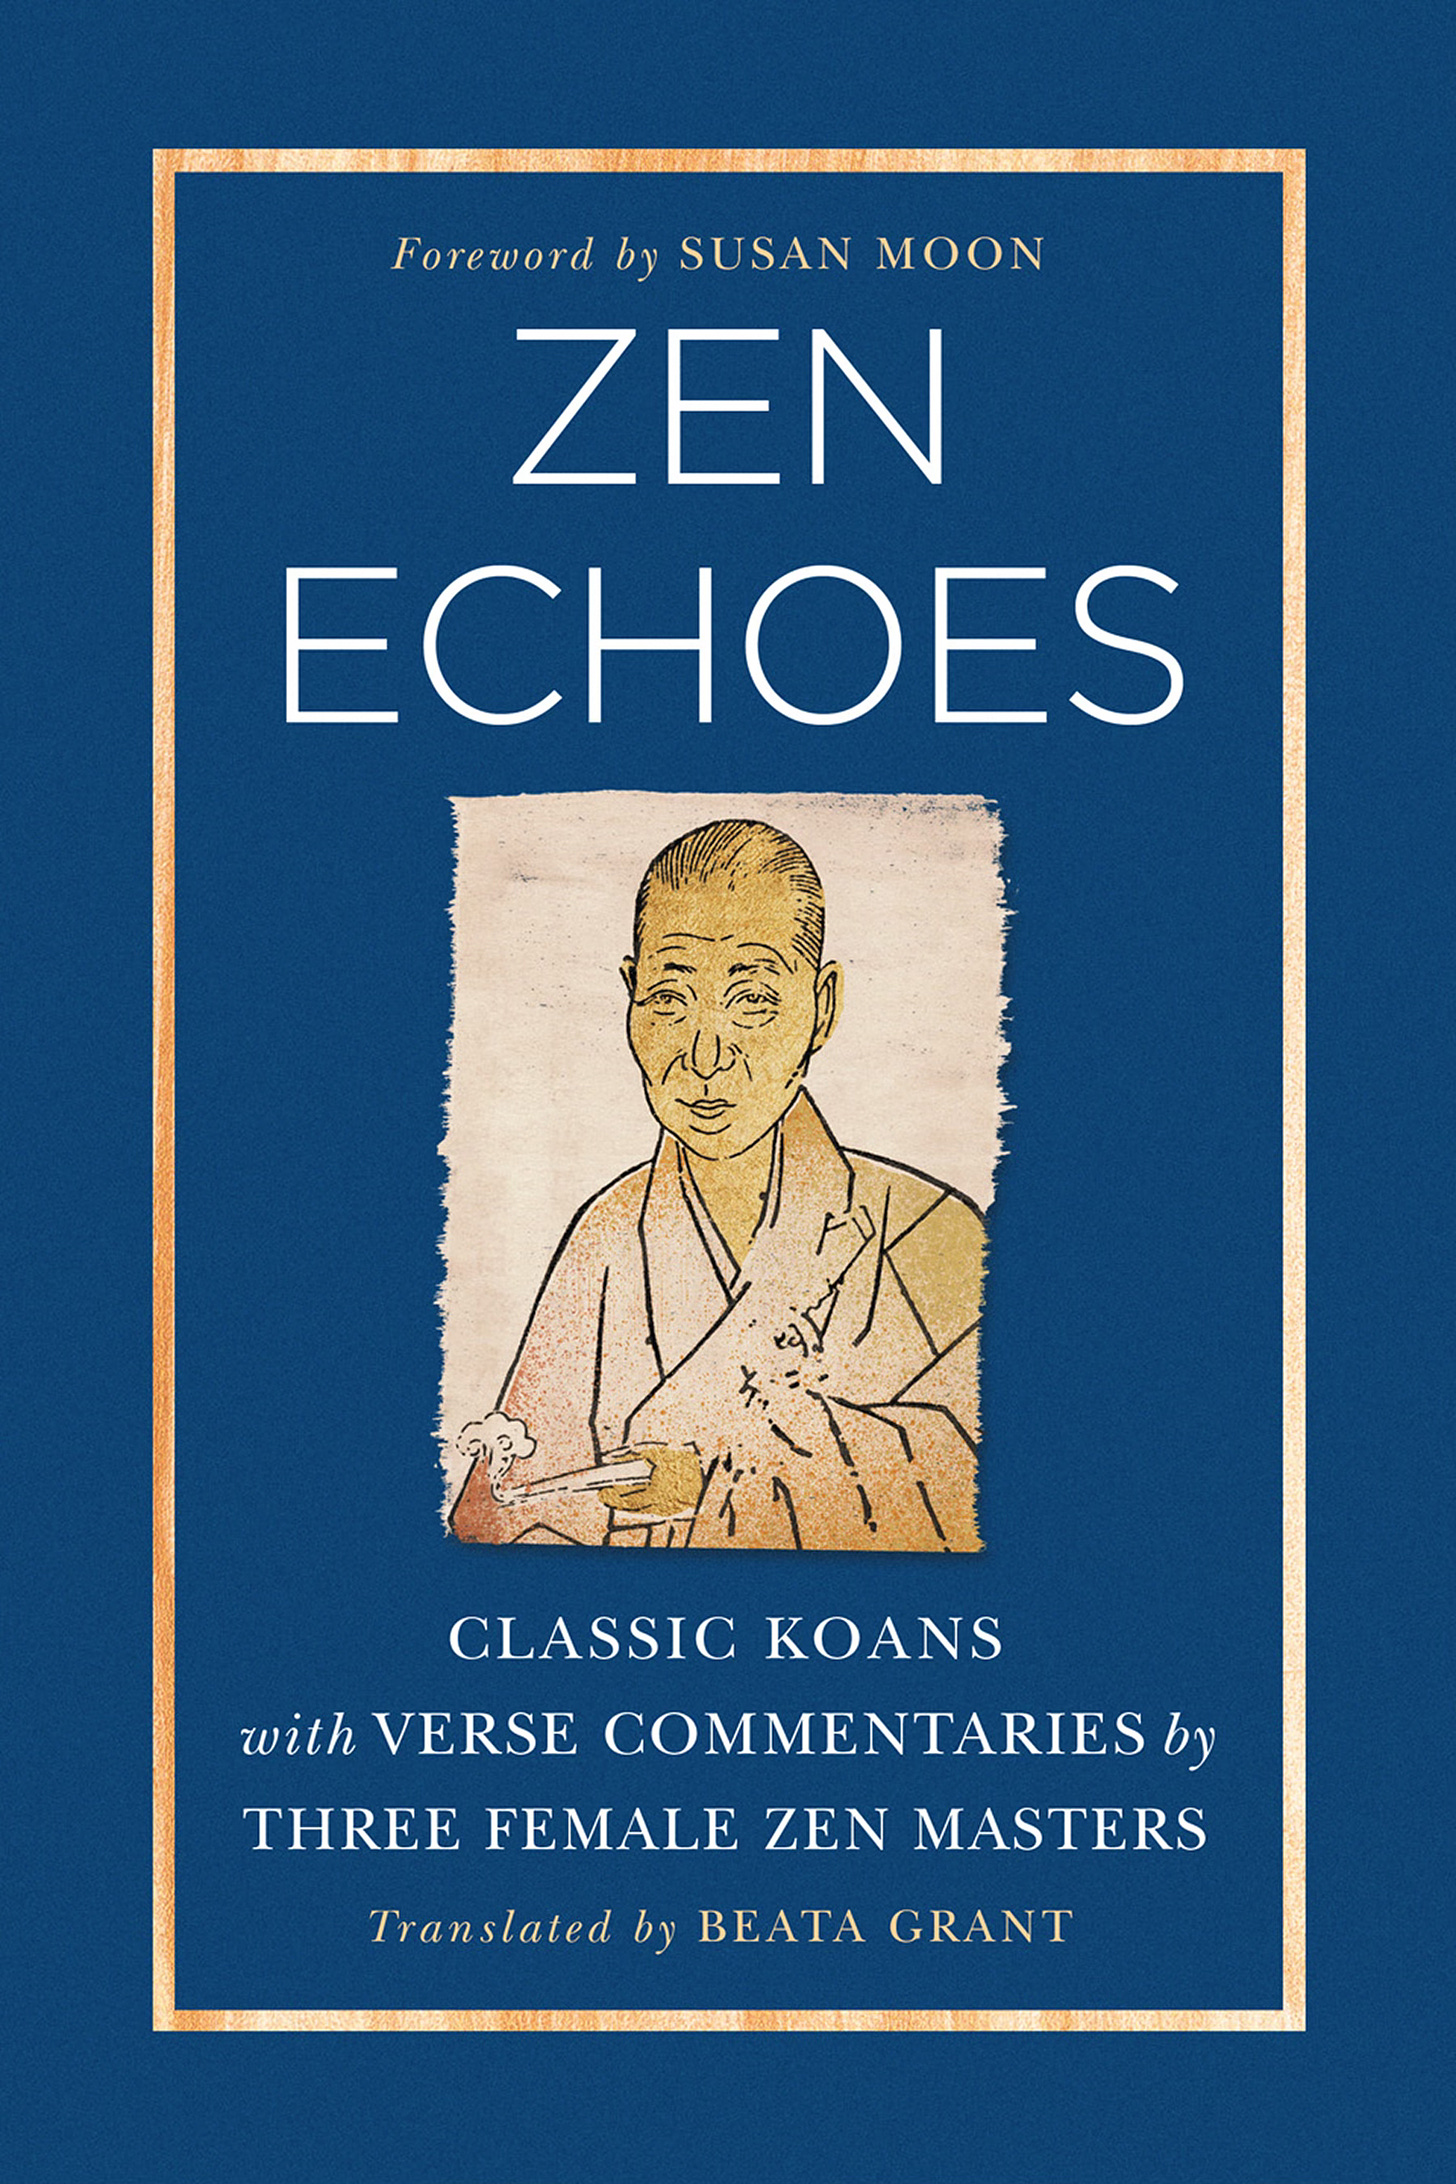 Front cover of Zen Echoes: Classic Koans with Verse Commentaries by Three Female Zen Masters, translated by Beata Grant, foreword by Susan Moon. The cover is blue with a boxed boundary; the title is printed in white lettering. In the middle of the cover is an inset portrait of a seventeenth century Zen nun.